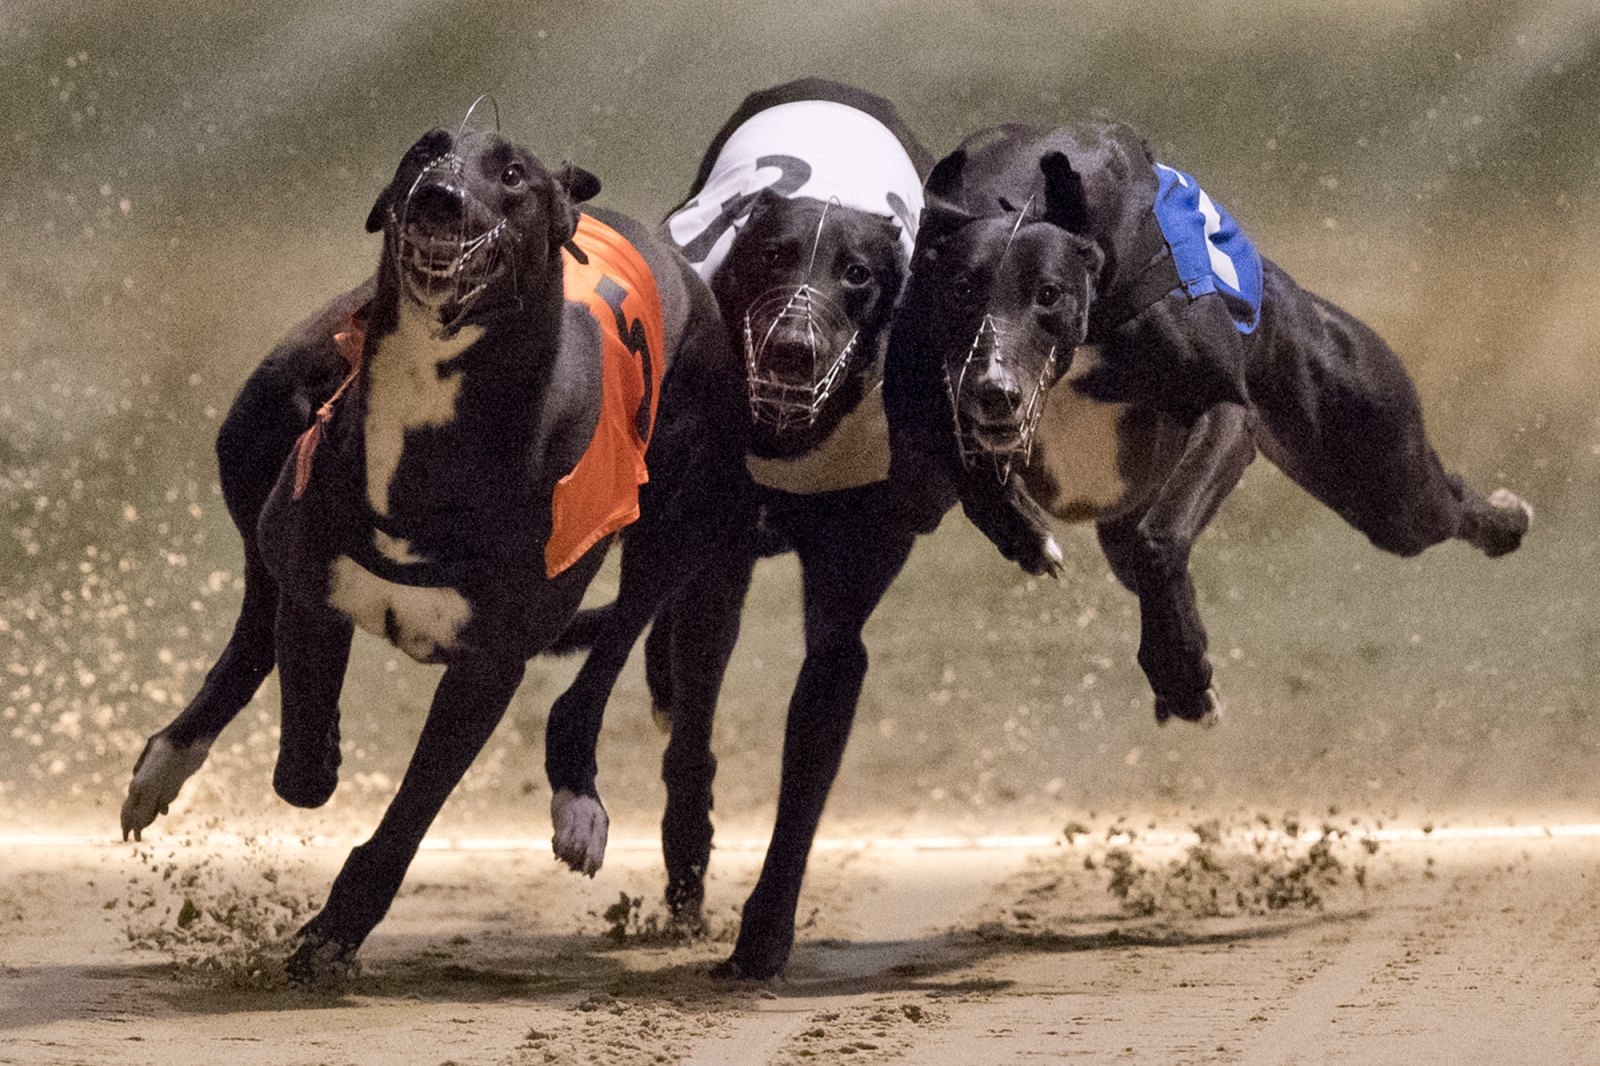 Cocaine found in 5 greyhounds at iconic Florida race track Derby Lane